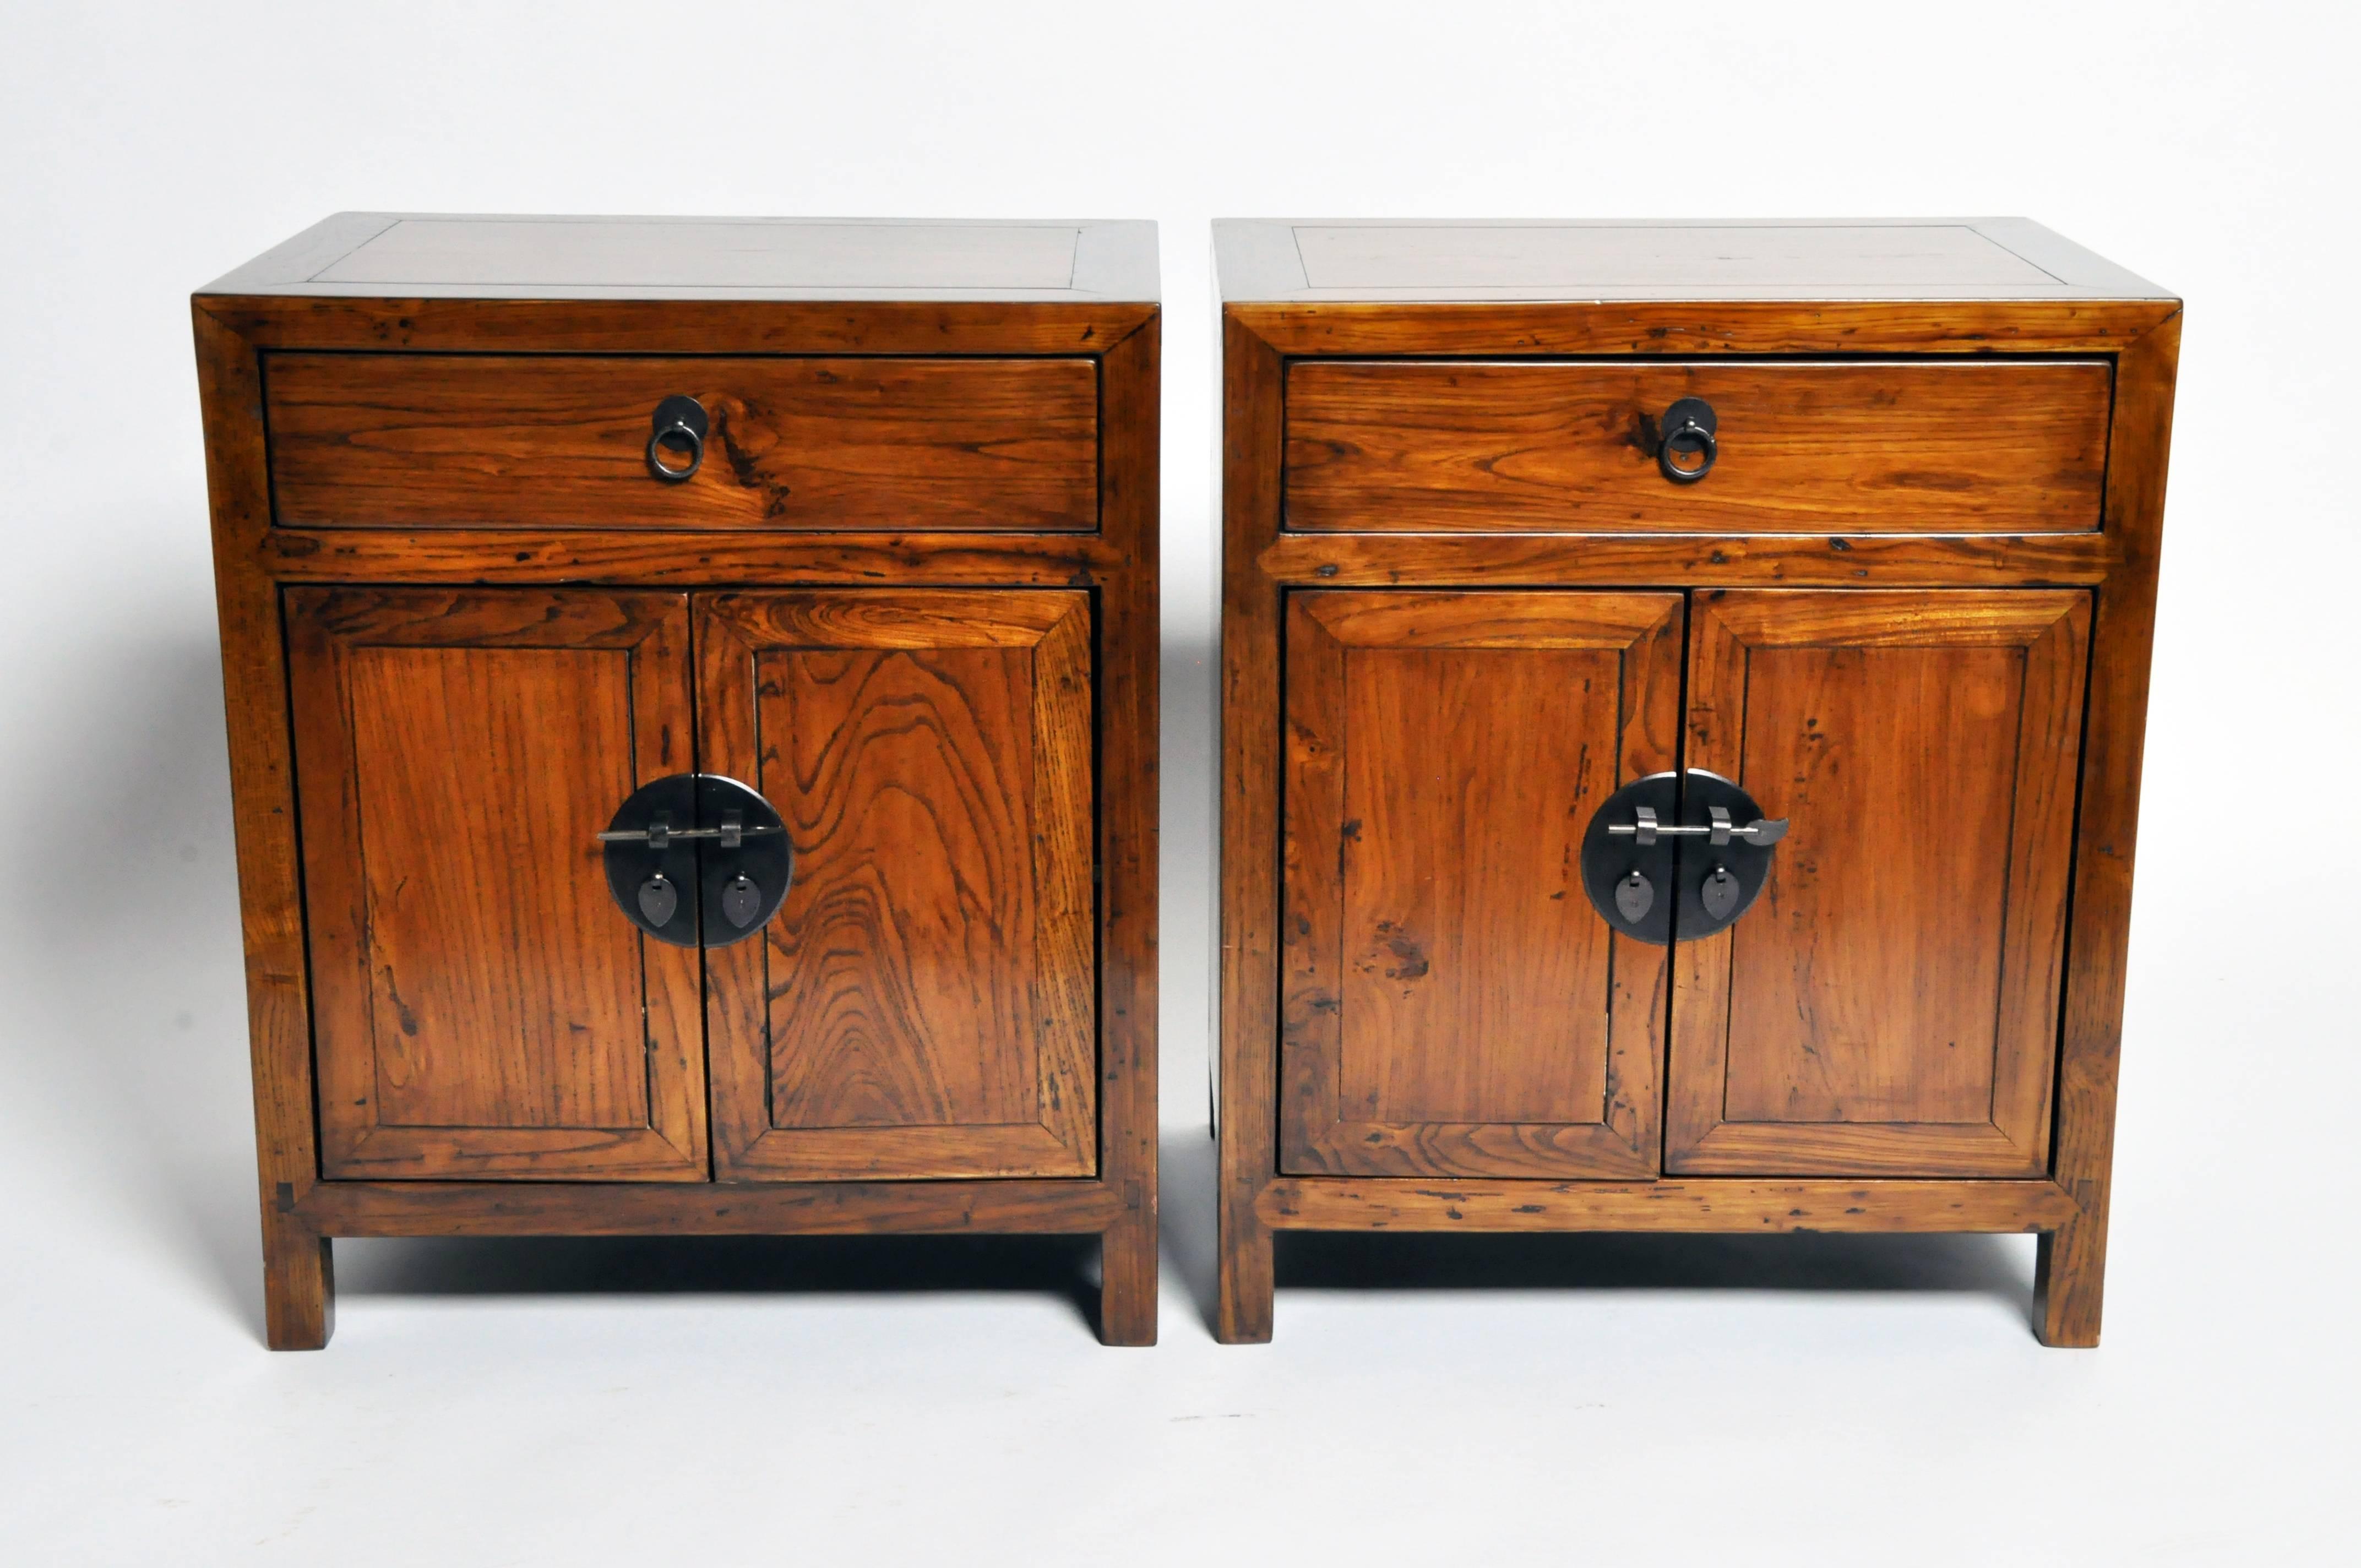 These Chinese bedside chests are made from elm wood and has been fully restored. They each features two drawers and a shelf for storage.